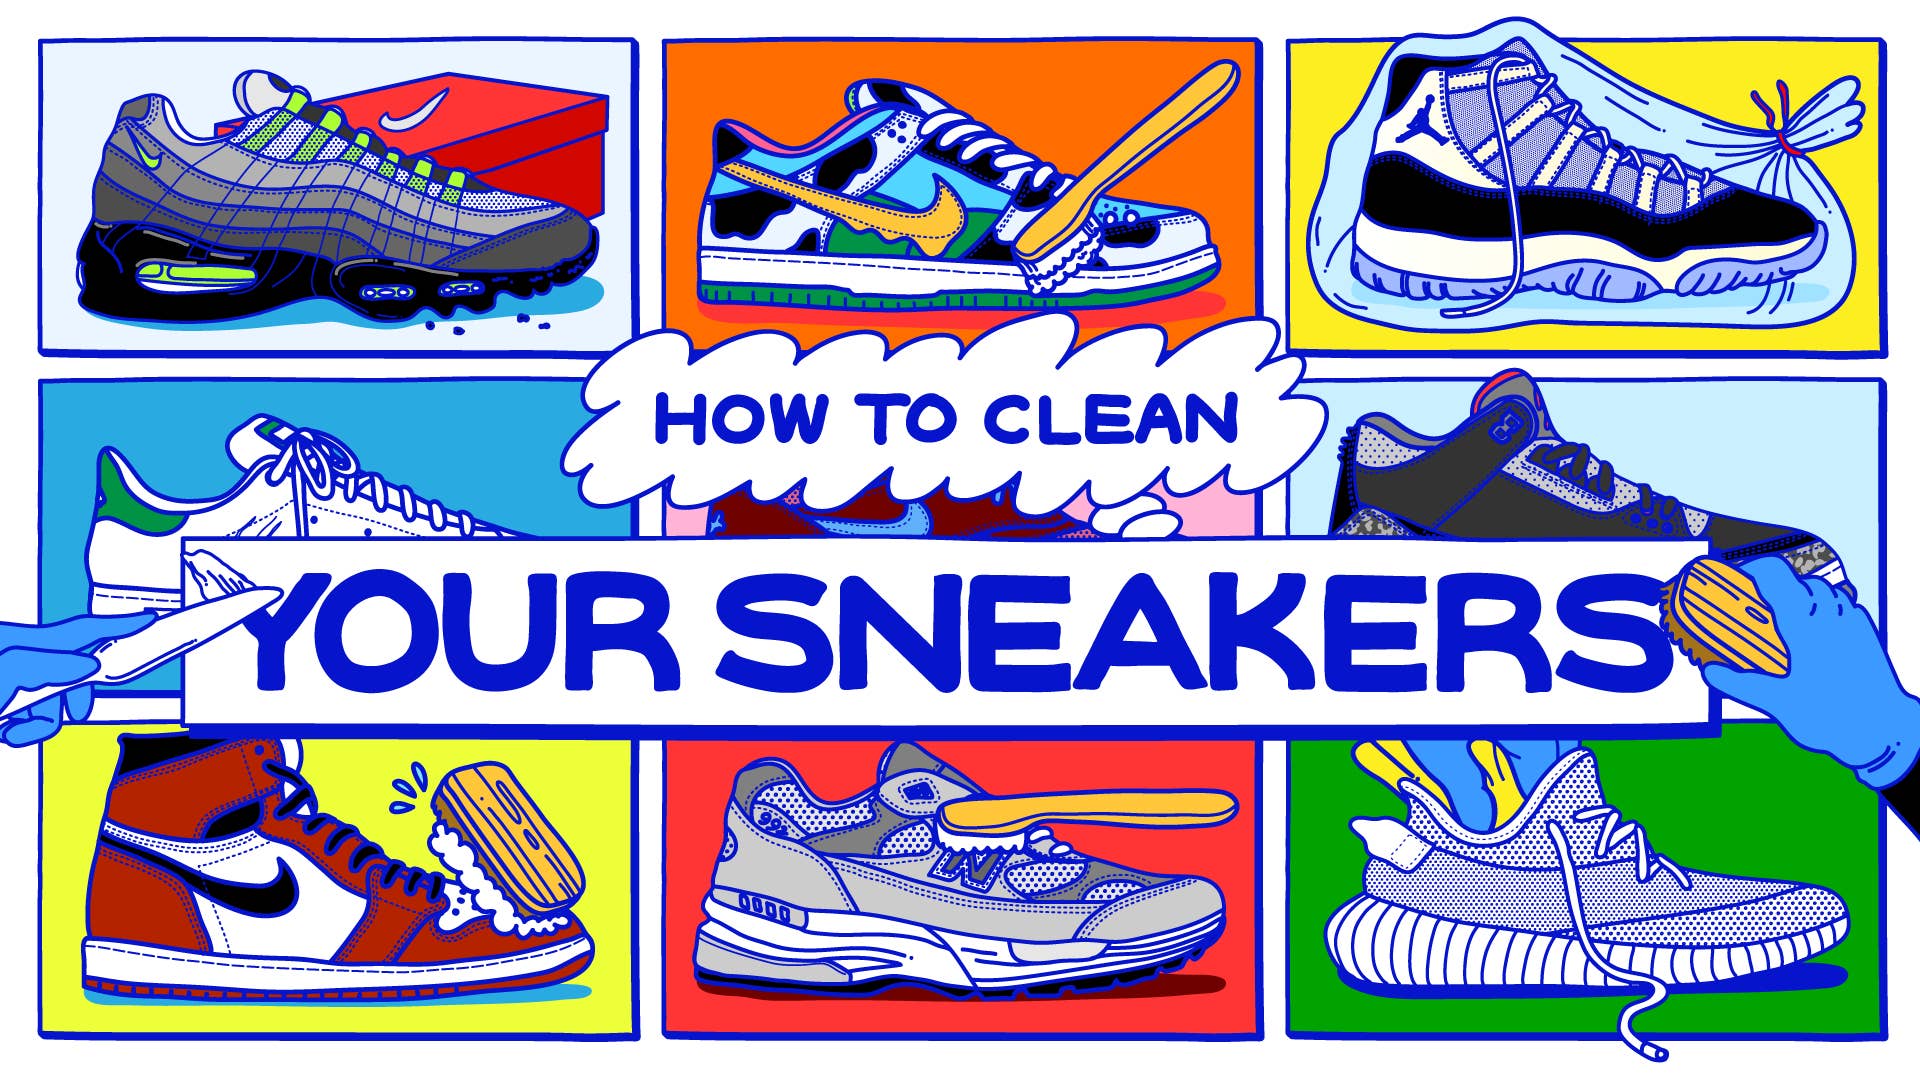 White Sneaker Cleaner Effective Remove Stains White Tennis Shoe